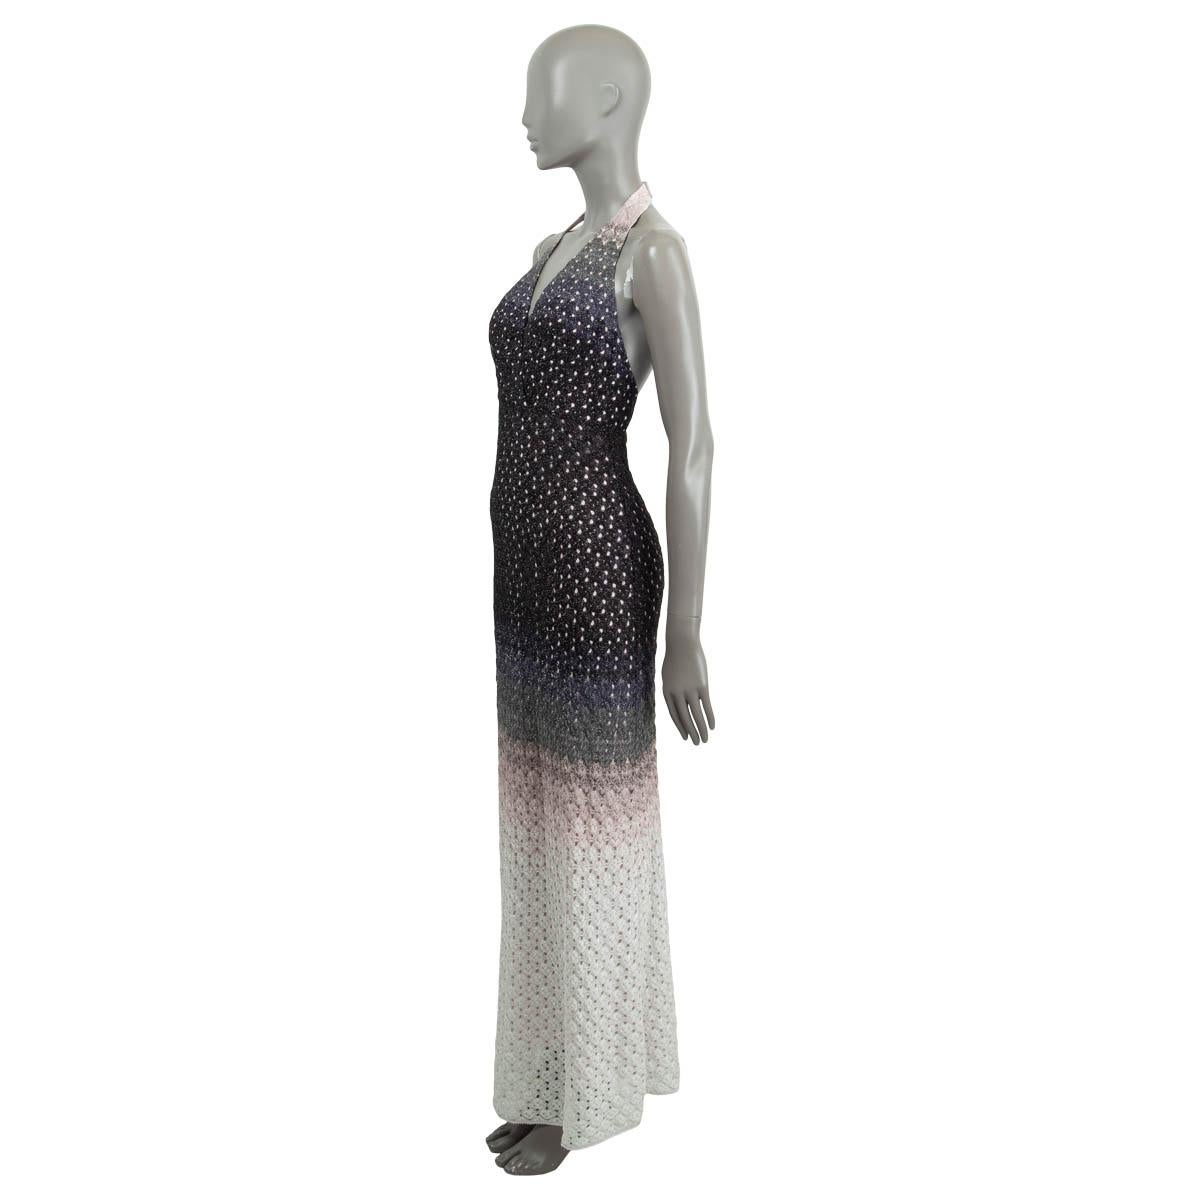 100% authentic Missoni halter neck maxi dress in black, light-pink, white, purple and silver viscose (assumed cause content tag is missing). Opens with two push buttons at the back neck. Lined in light pink silk and elastane (assumed cause tag is